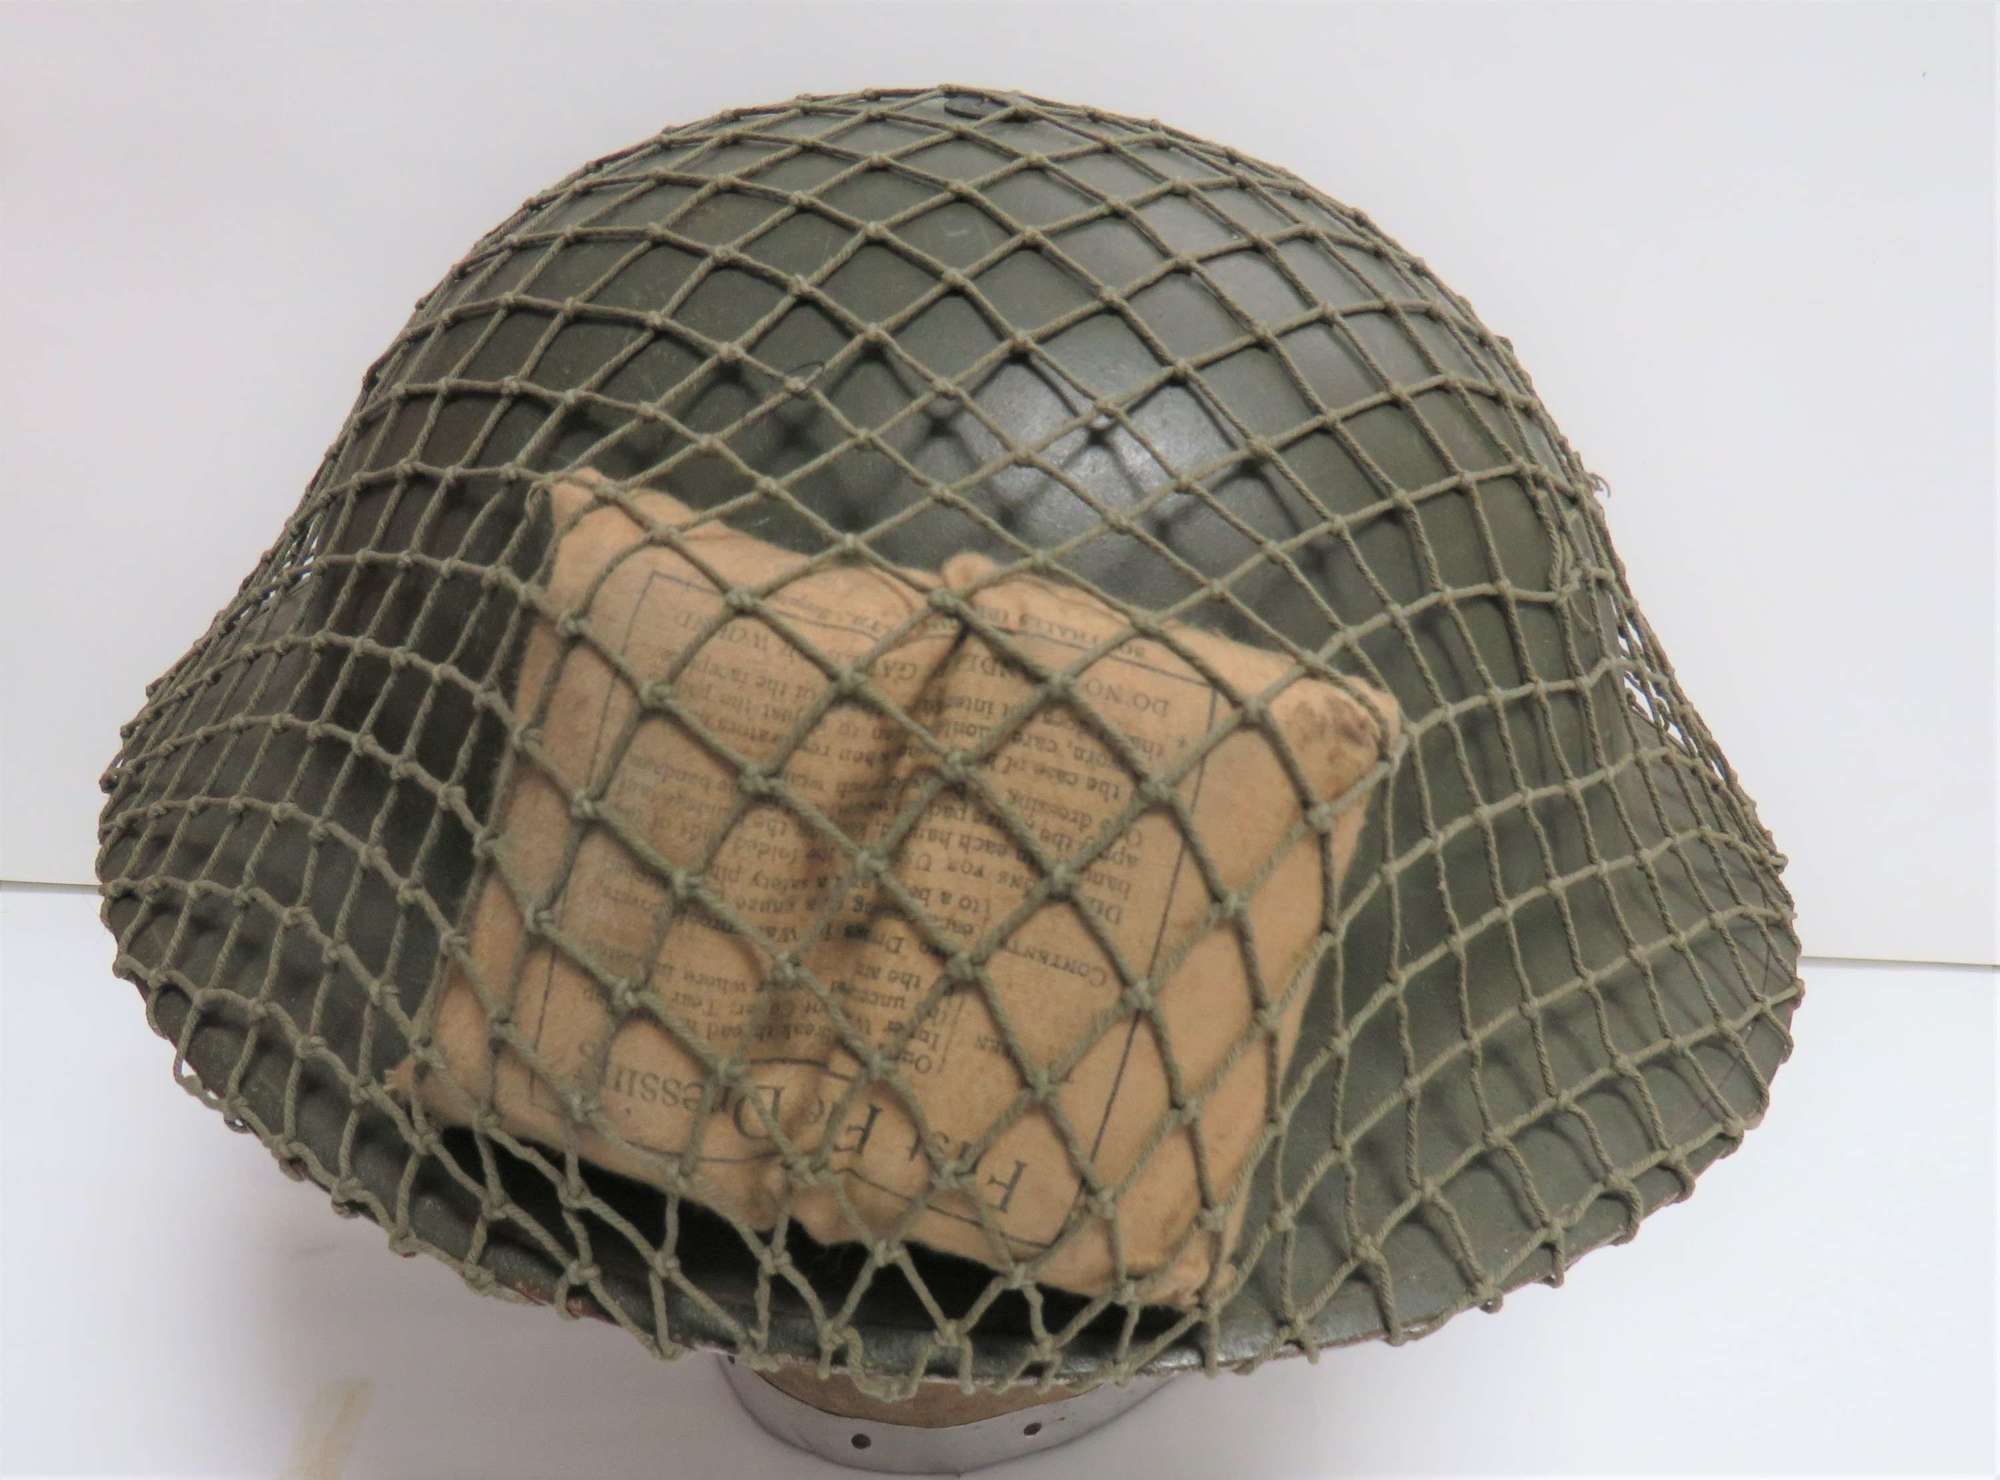 Early War Steel Helmet with cammo cover and First Aid Dressing